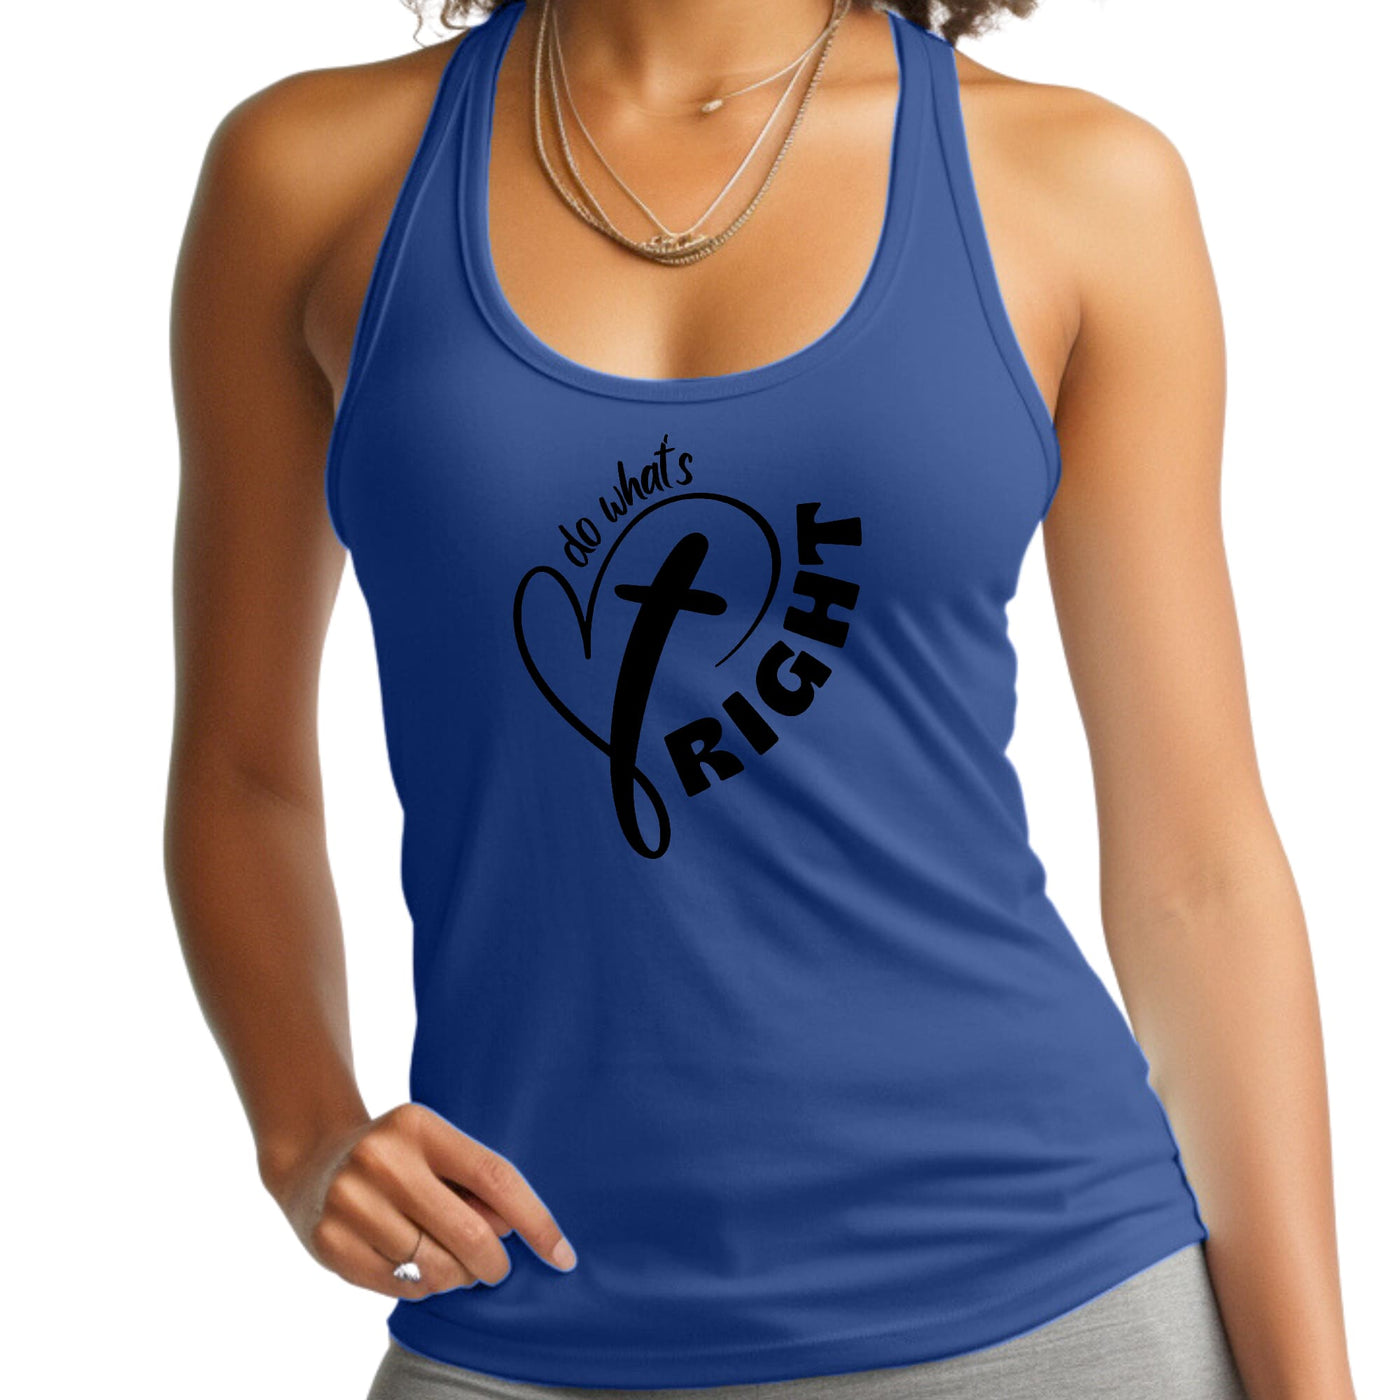 Womens Tank Top Fitness Shirt Say It Soul - Do What’s Right Black - Womens